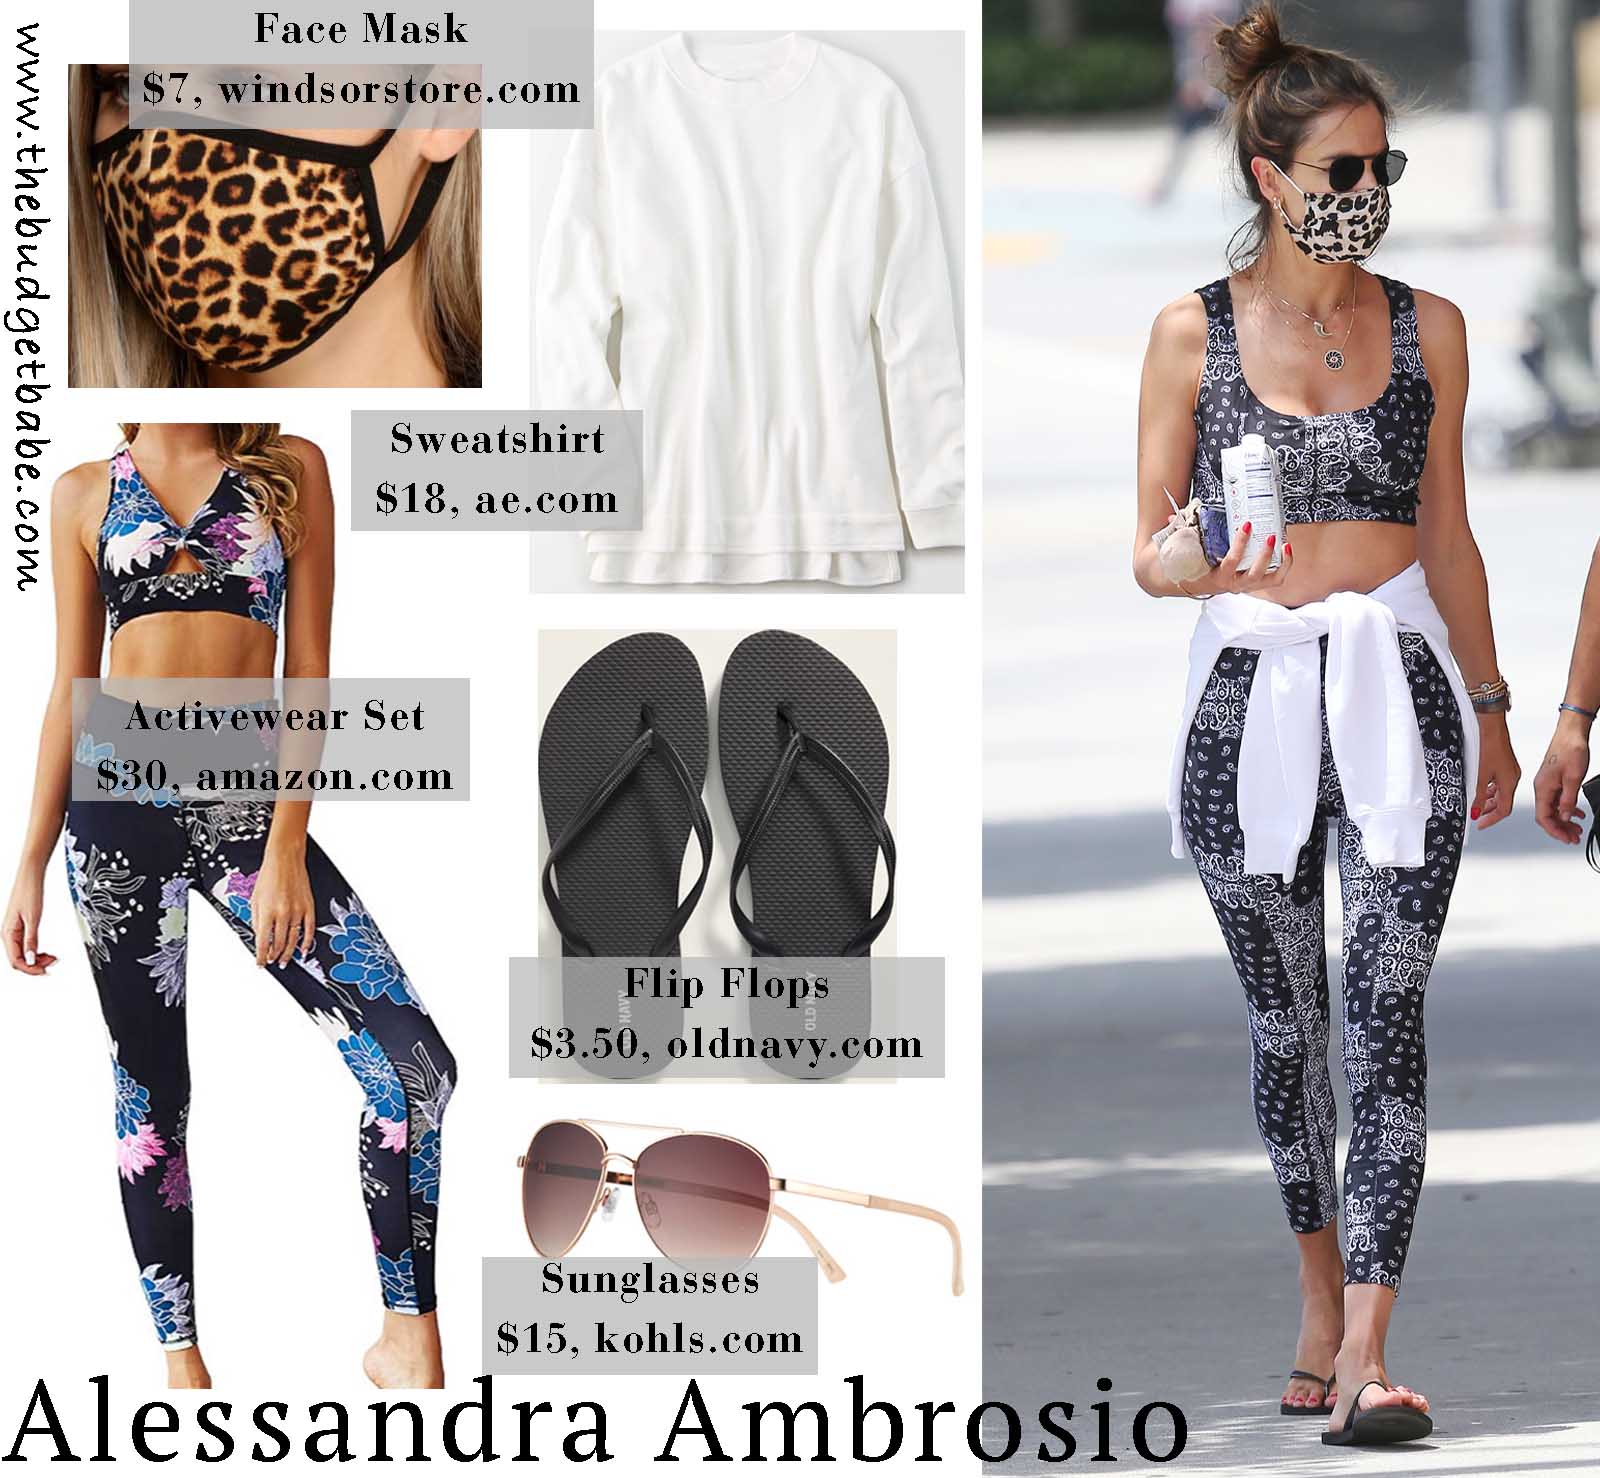 Alessandra is the ultimate workour inspiration in this cute set!